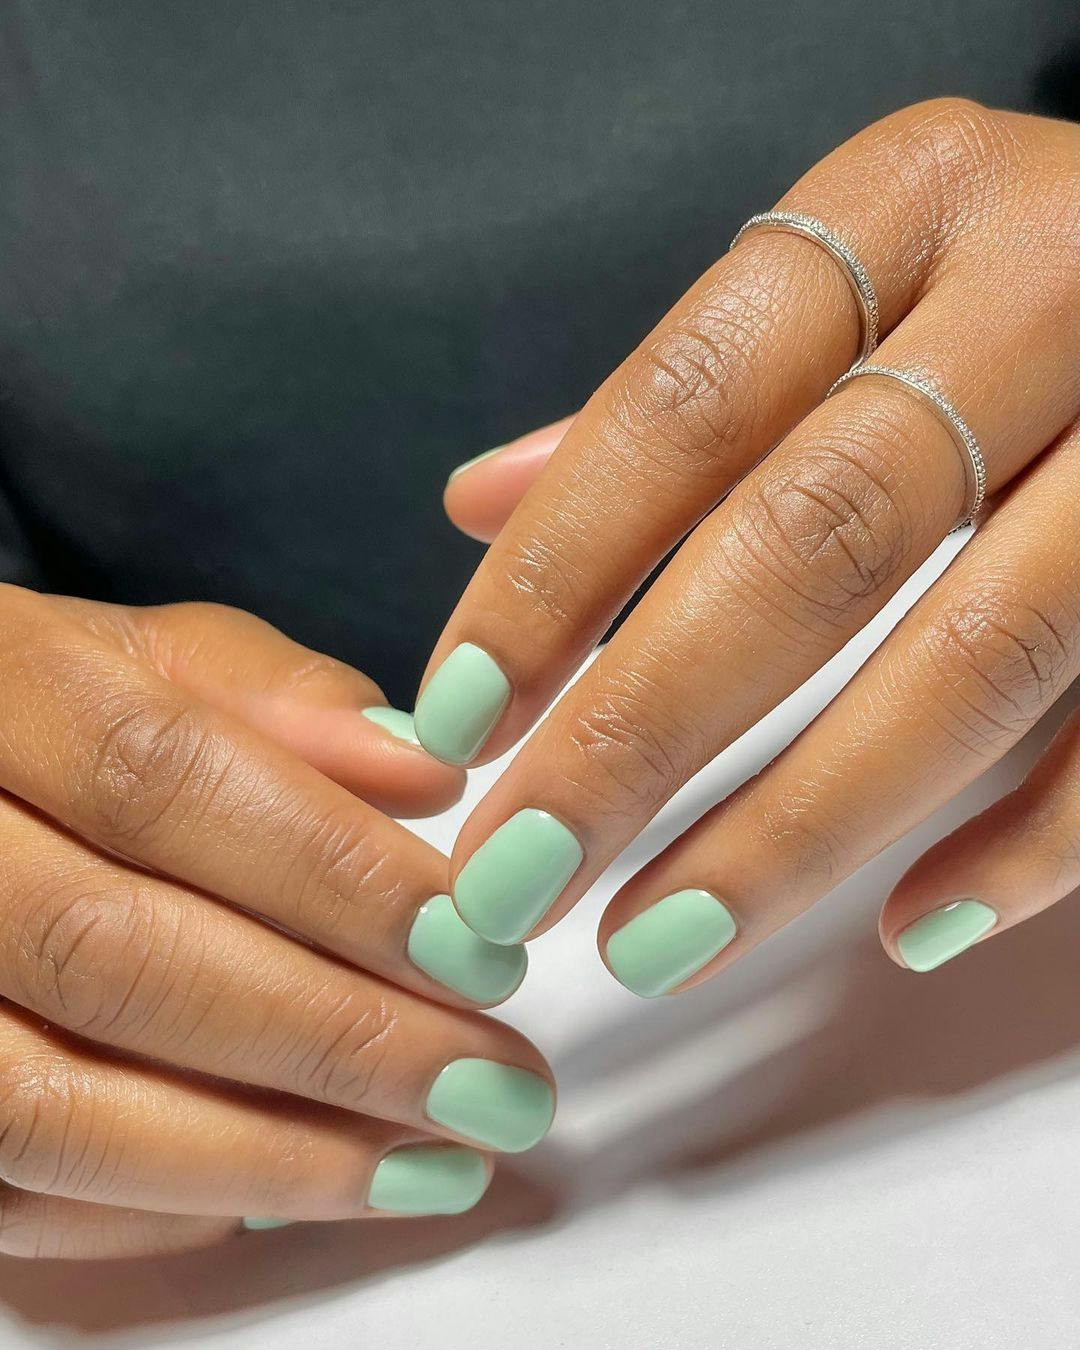 15 Neon Nail Polishes To Light Up Your Nails This Summer | HuffPost Life